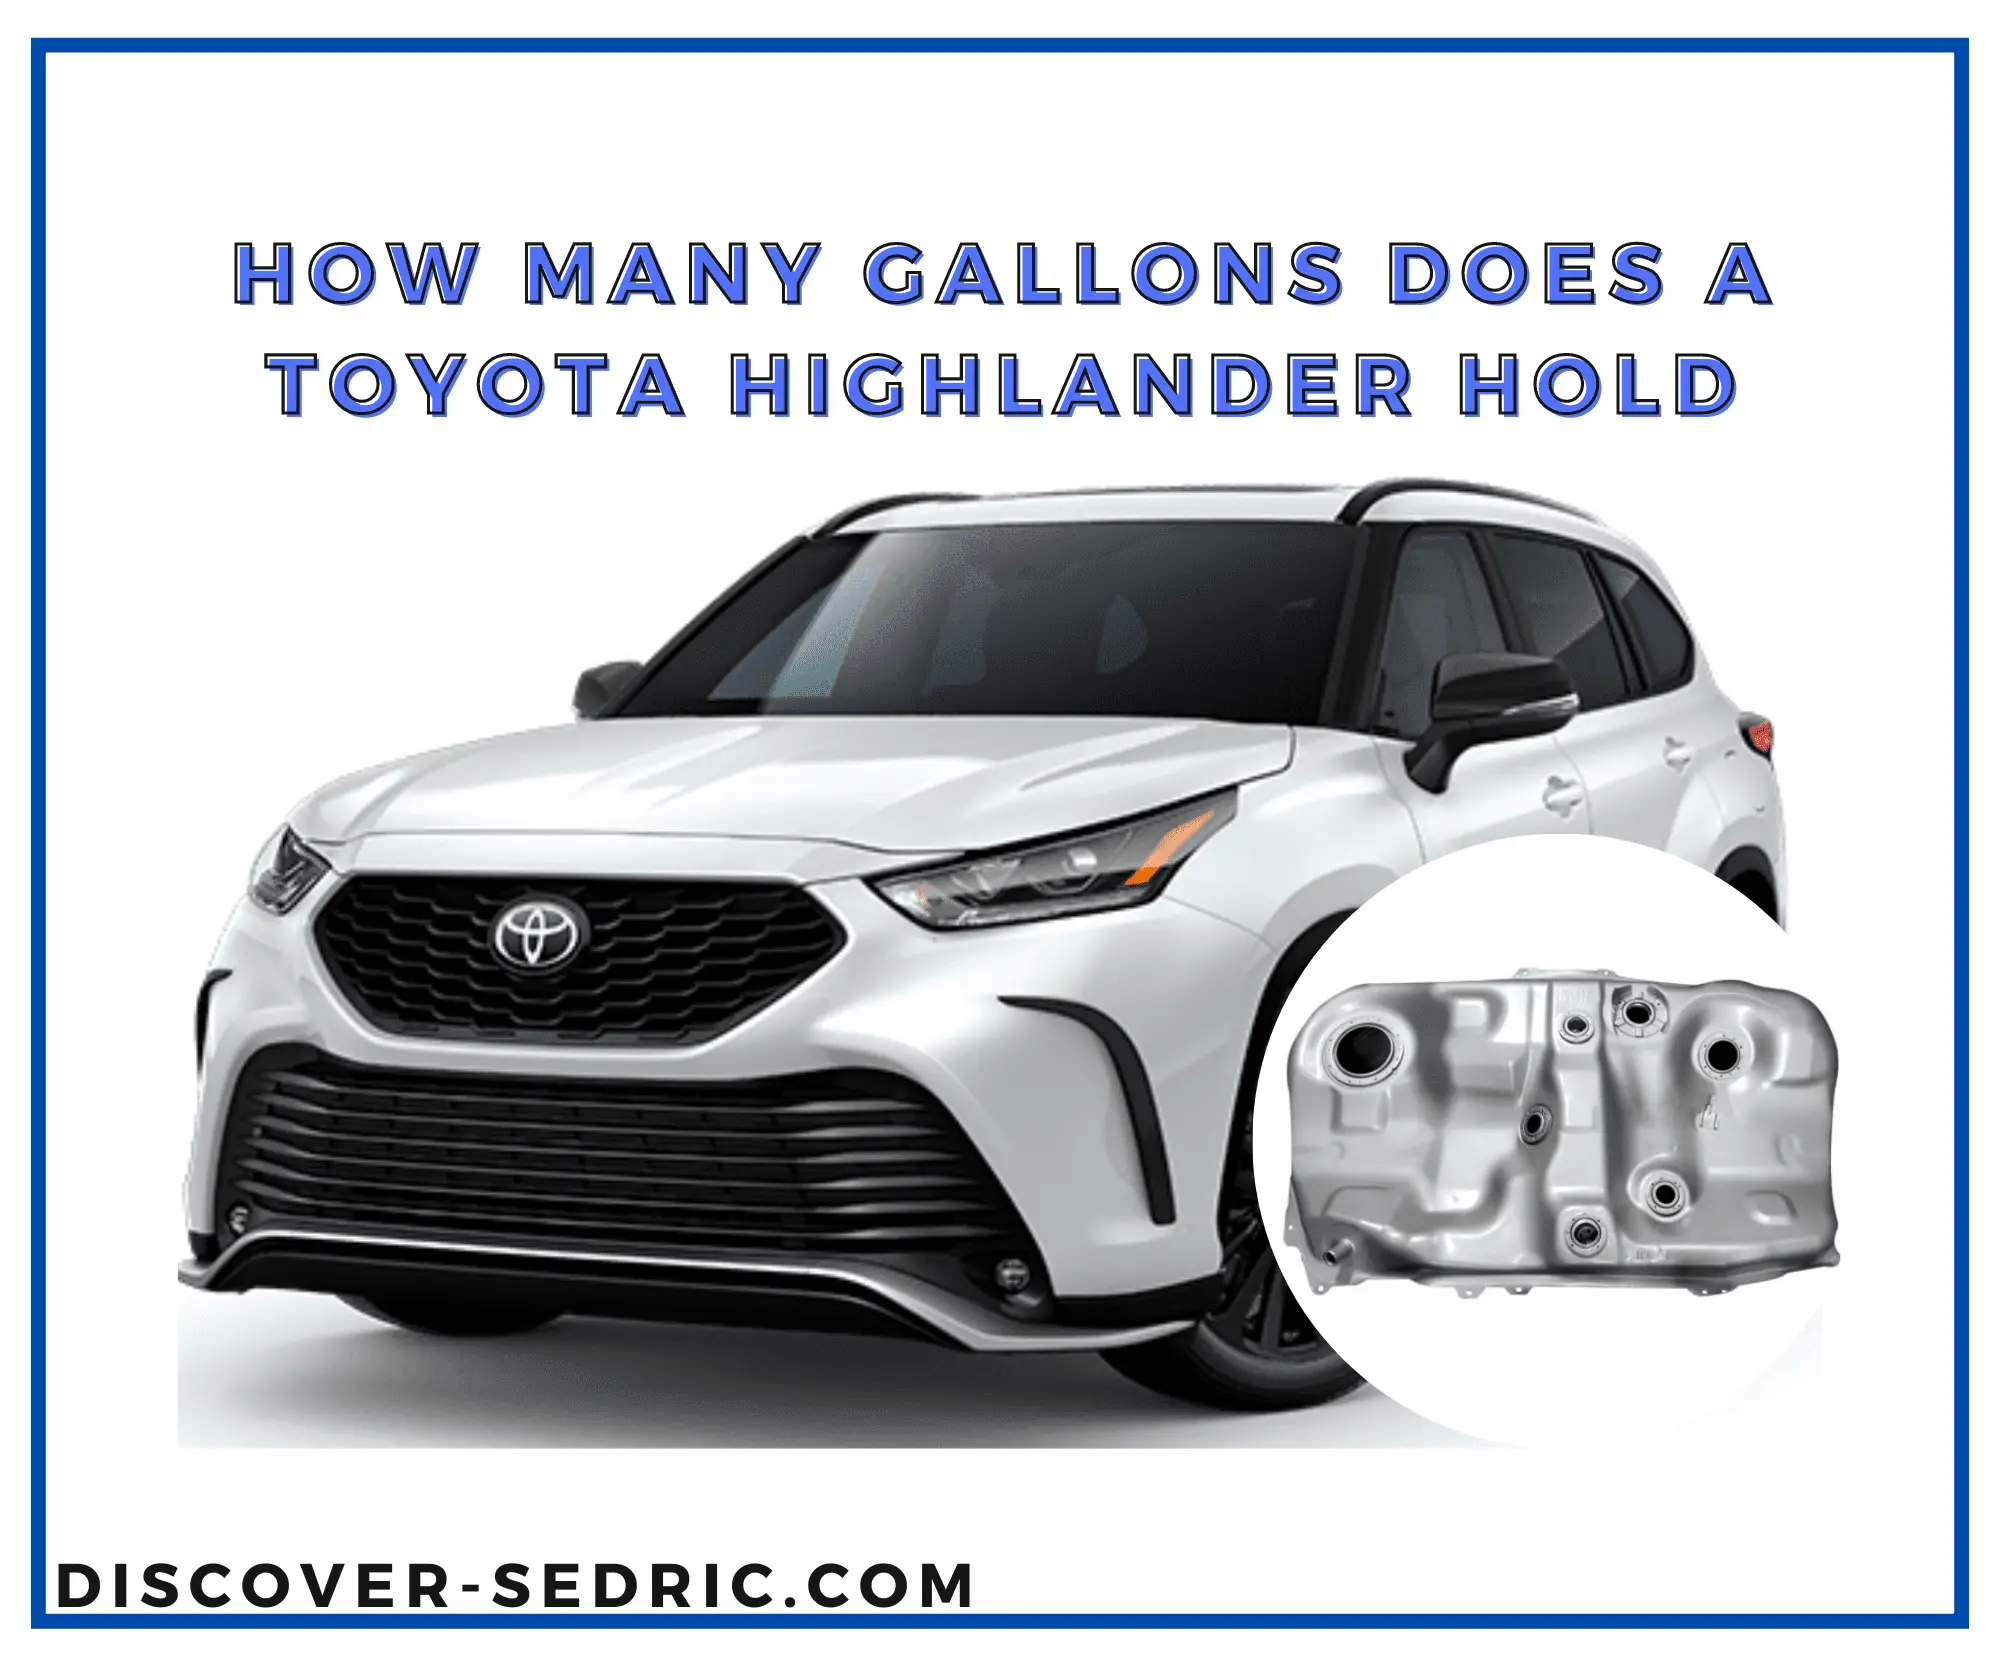 Gallons Does A Toyota highlander Hold